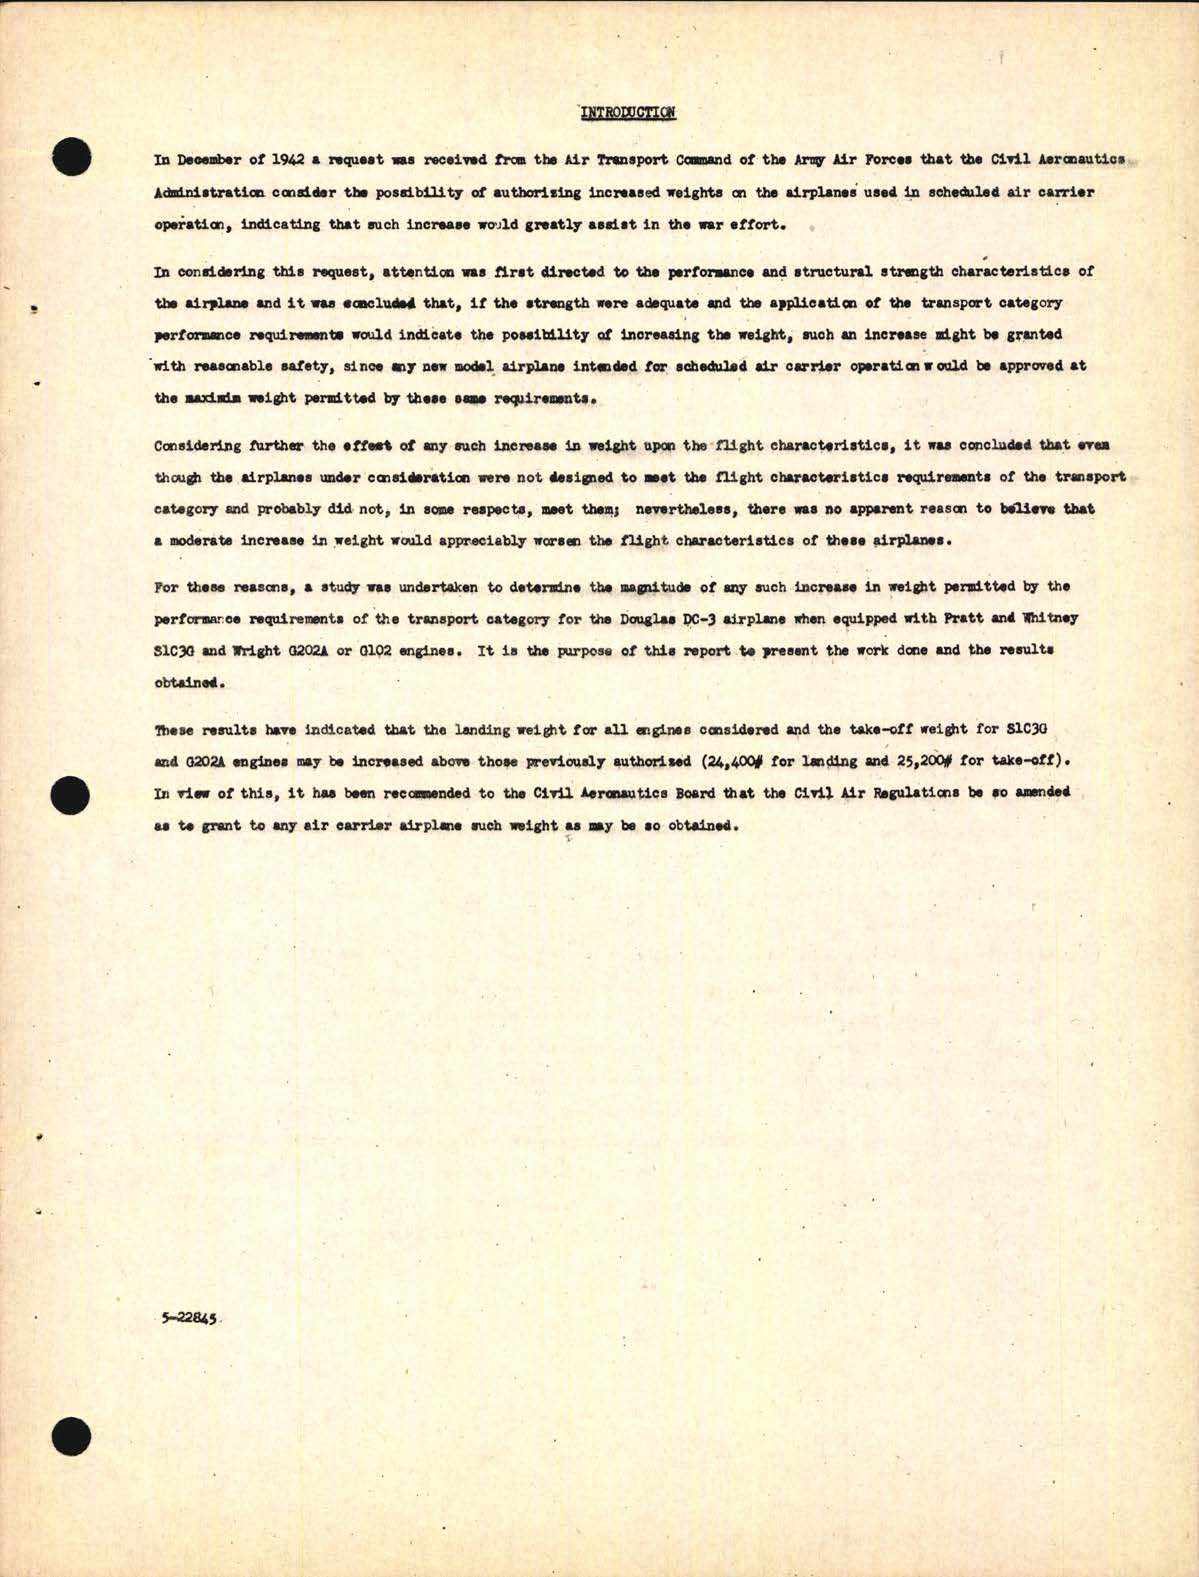 Sample page 7 from AirCorps Library document: A Study to Determine the Maximum Weights Permitted by the Transport Category Requirements for the DC-3